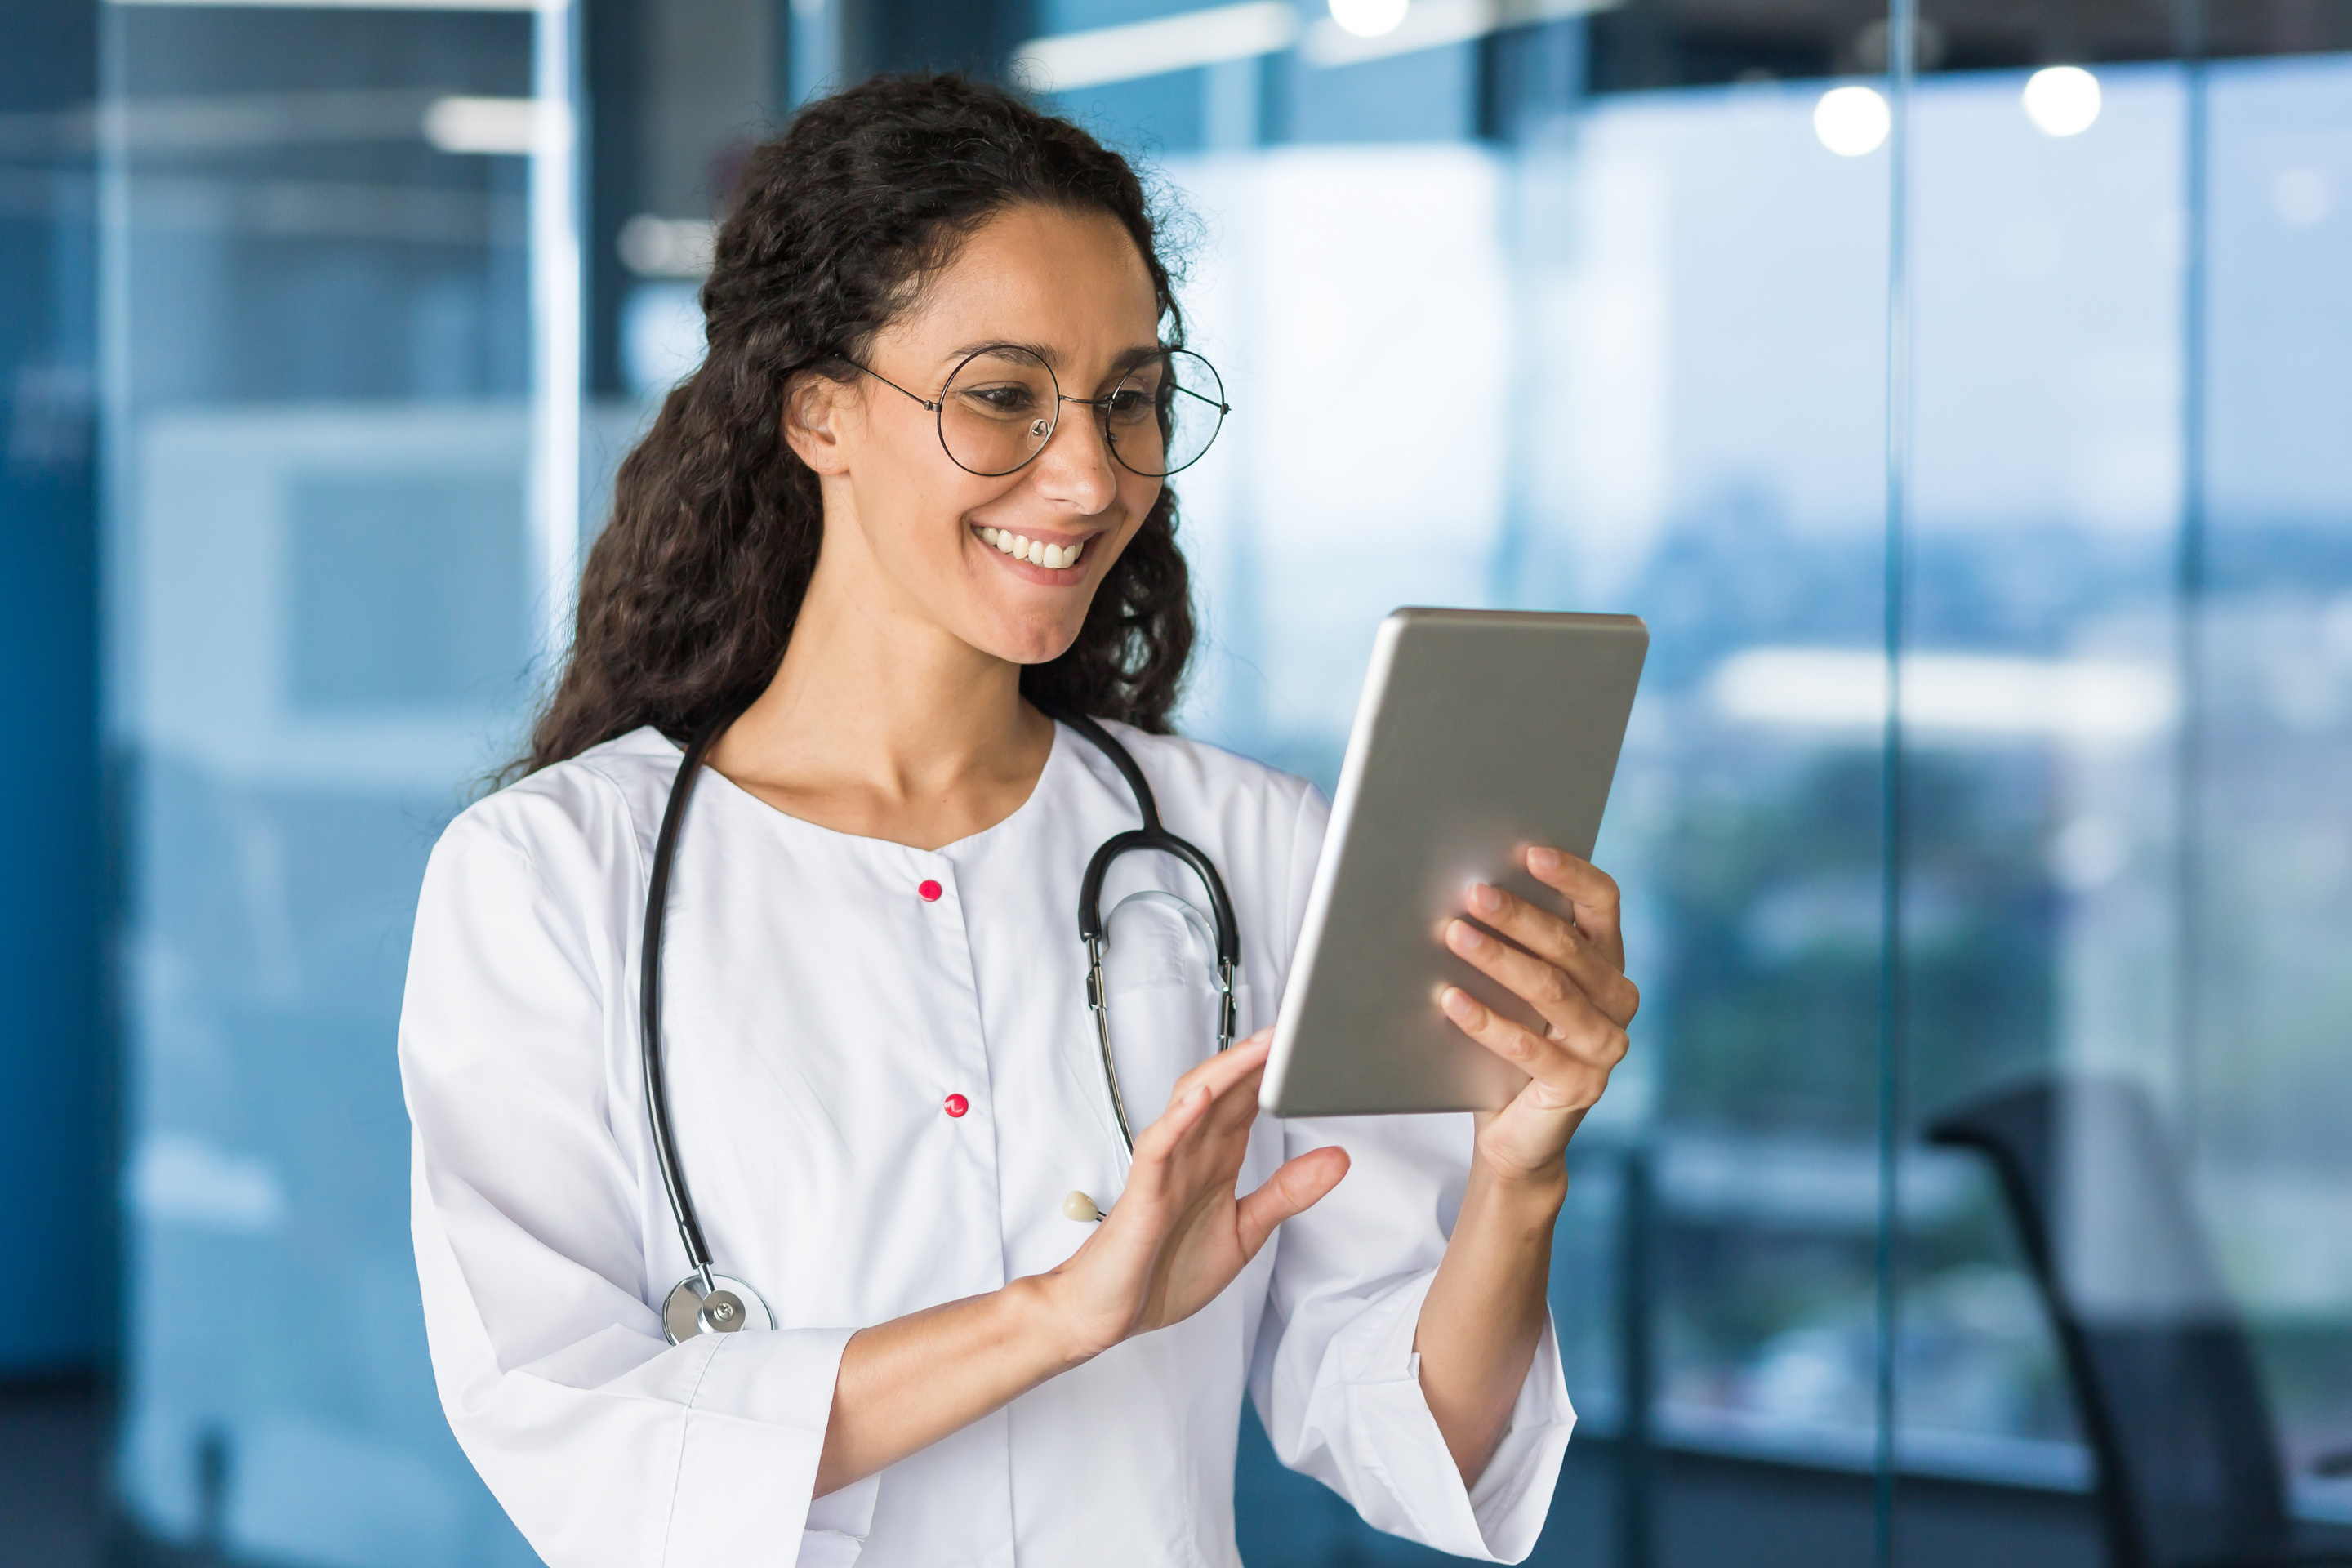 Latin American doctor woman using tablet computer, female doctor working inside office building wearing white medical coat